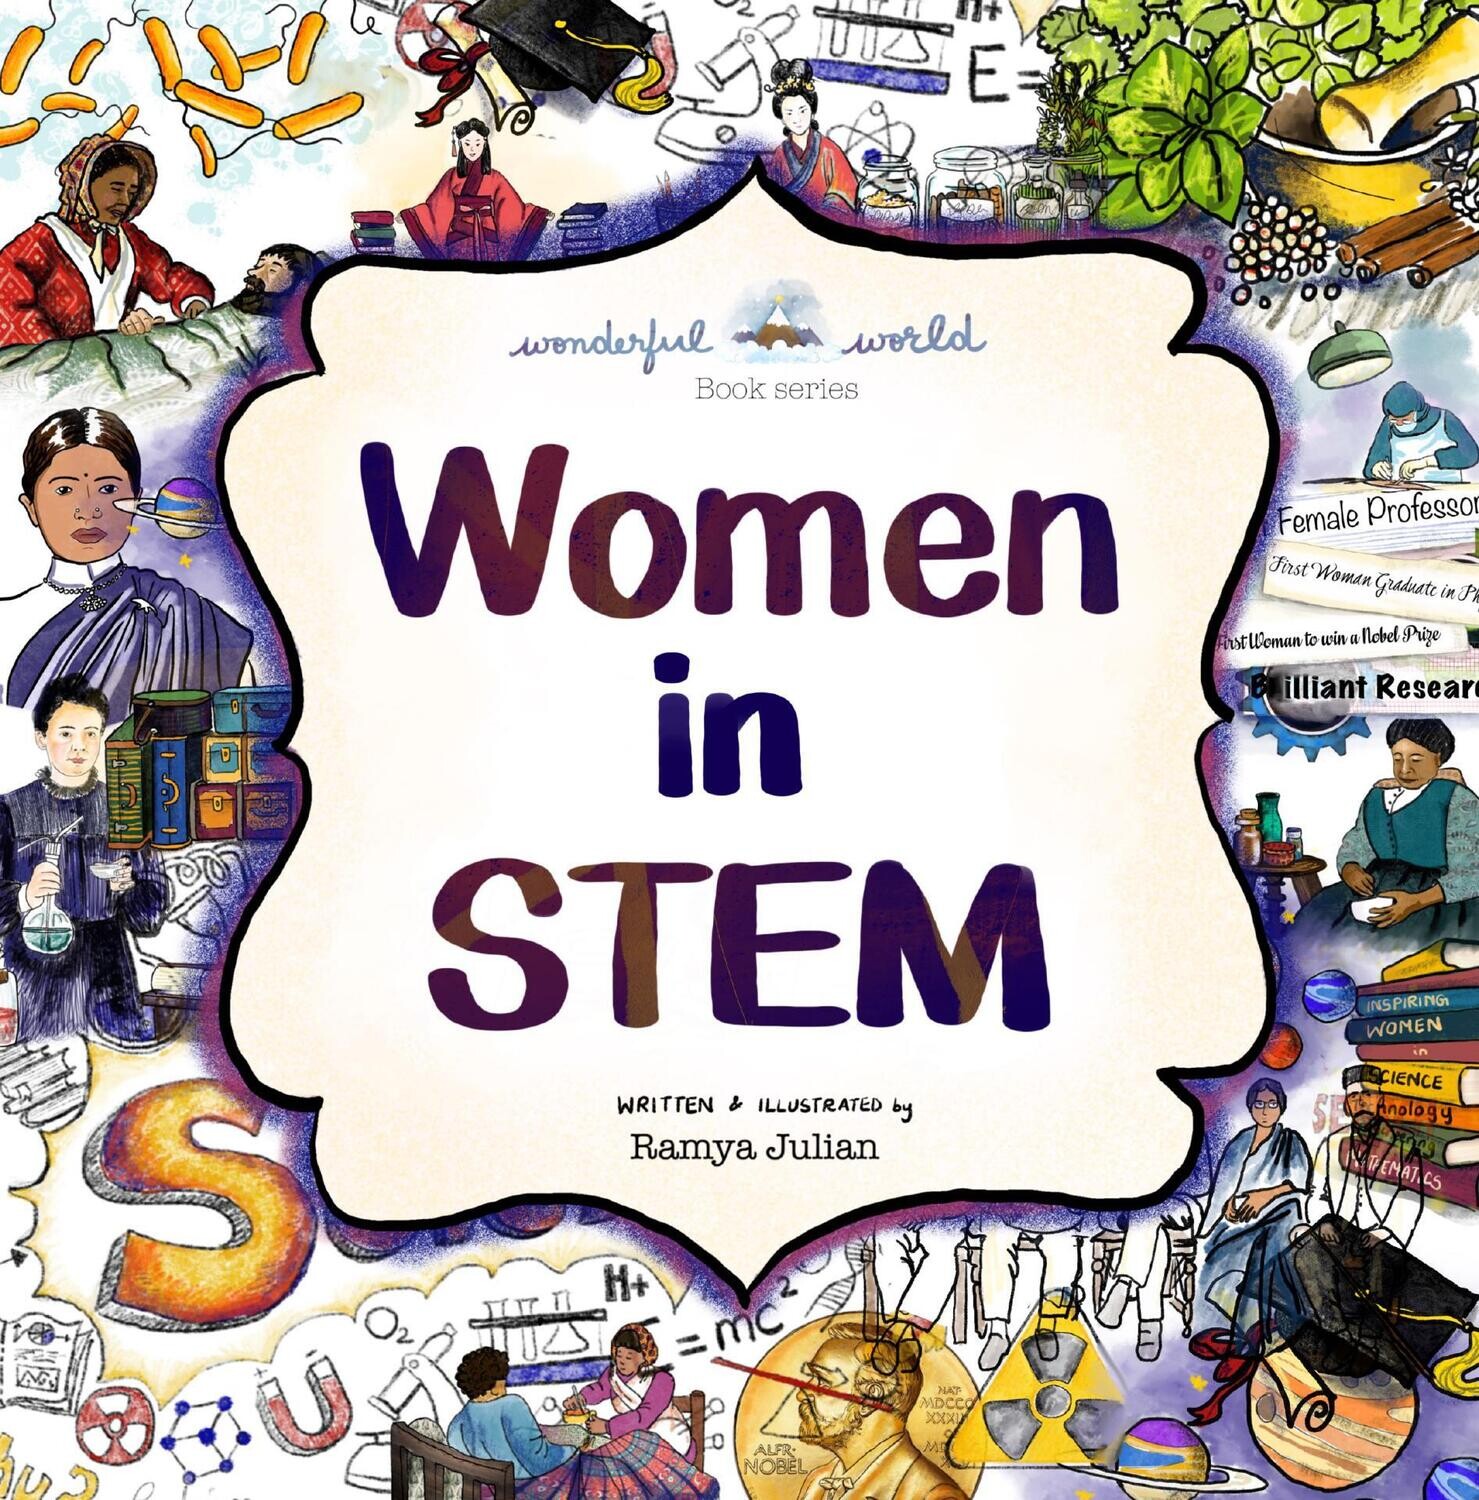 Signed Copy of Women in STEM - Hardcover